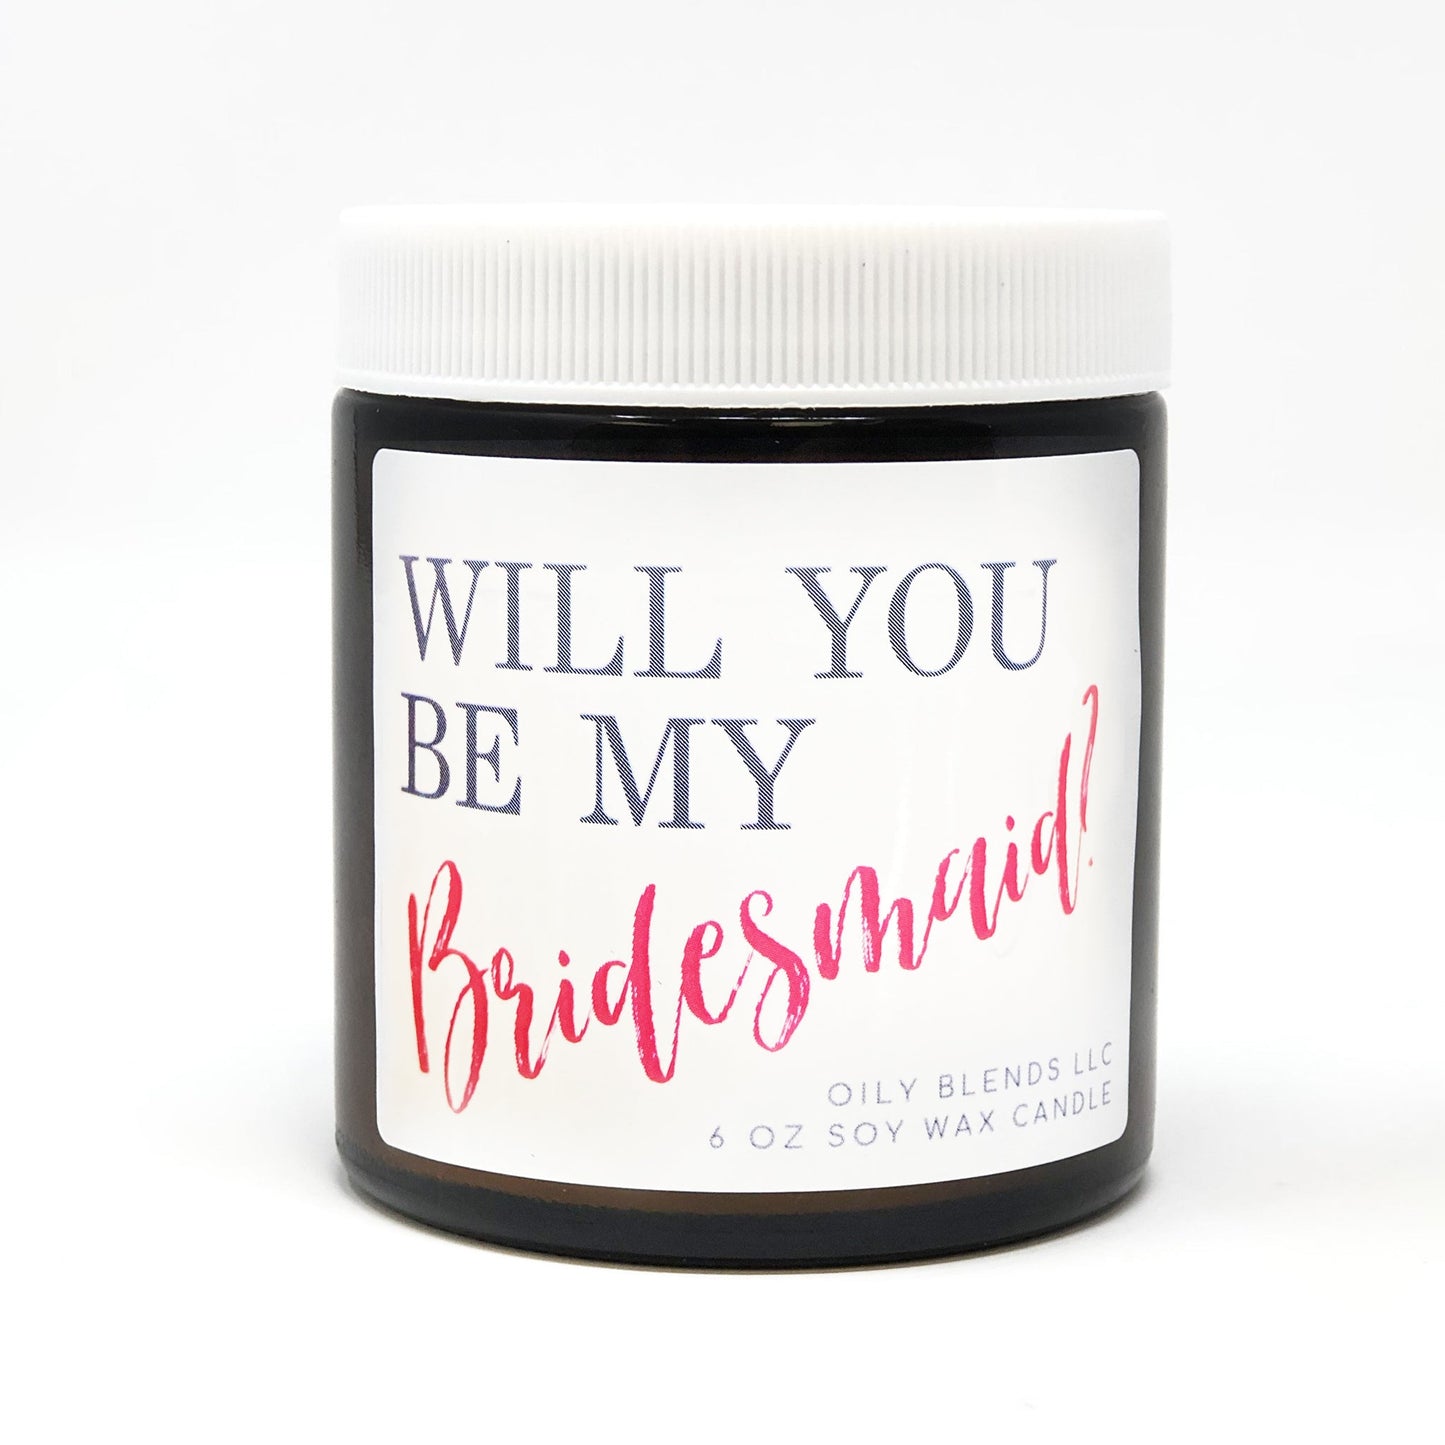 Bridesmaid Candle - 25 Hour Burn Time Soy Wax Candles